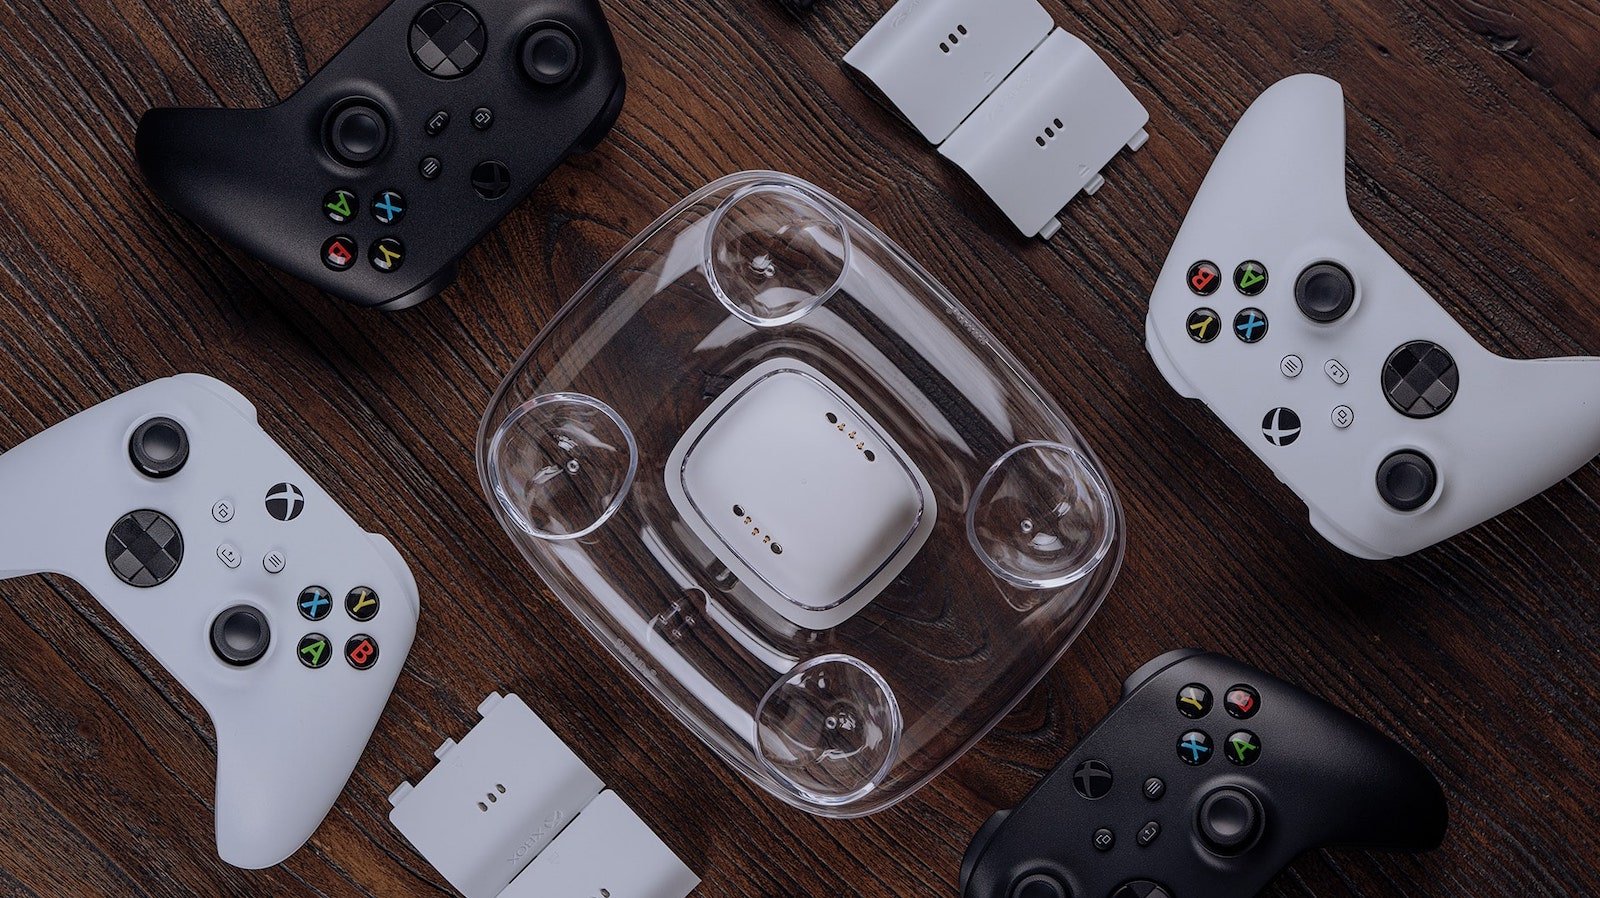 8BitDo Dual Charging Dock for Xbox wireless controllers provides secure magnetic charging